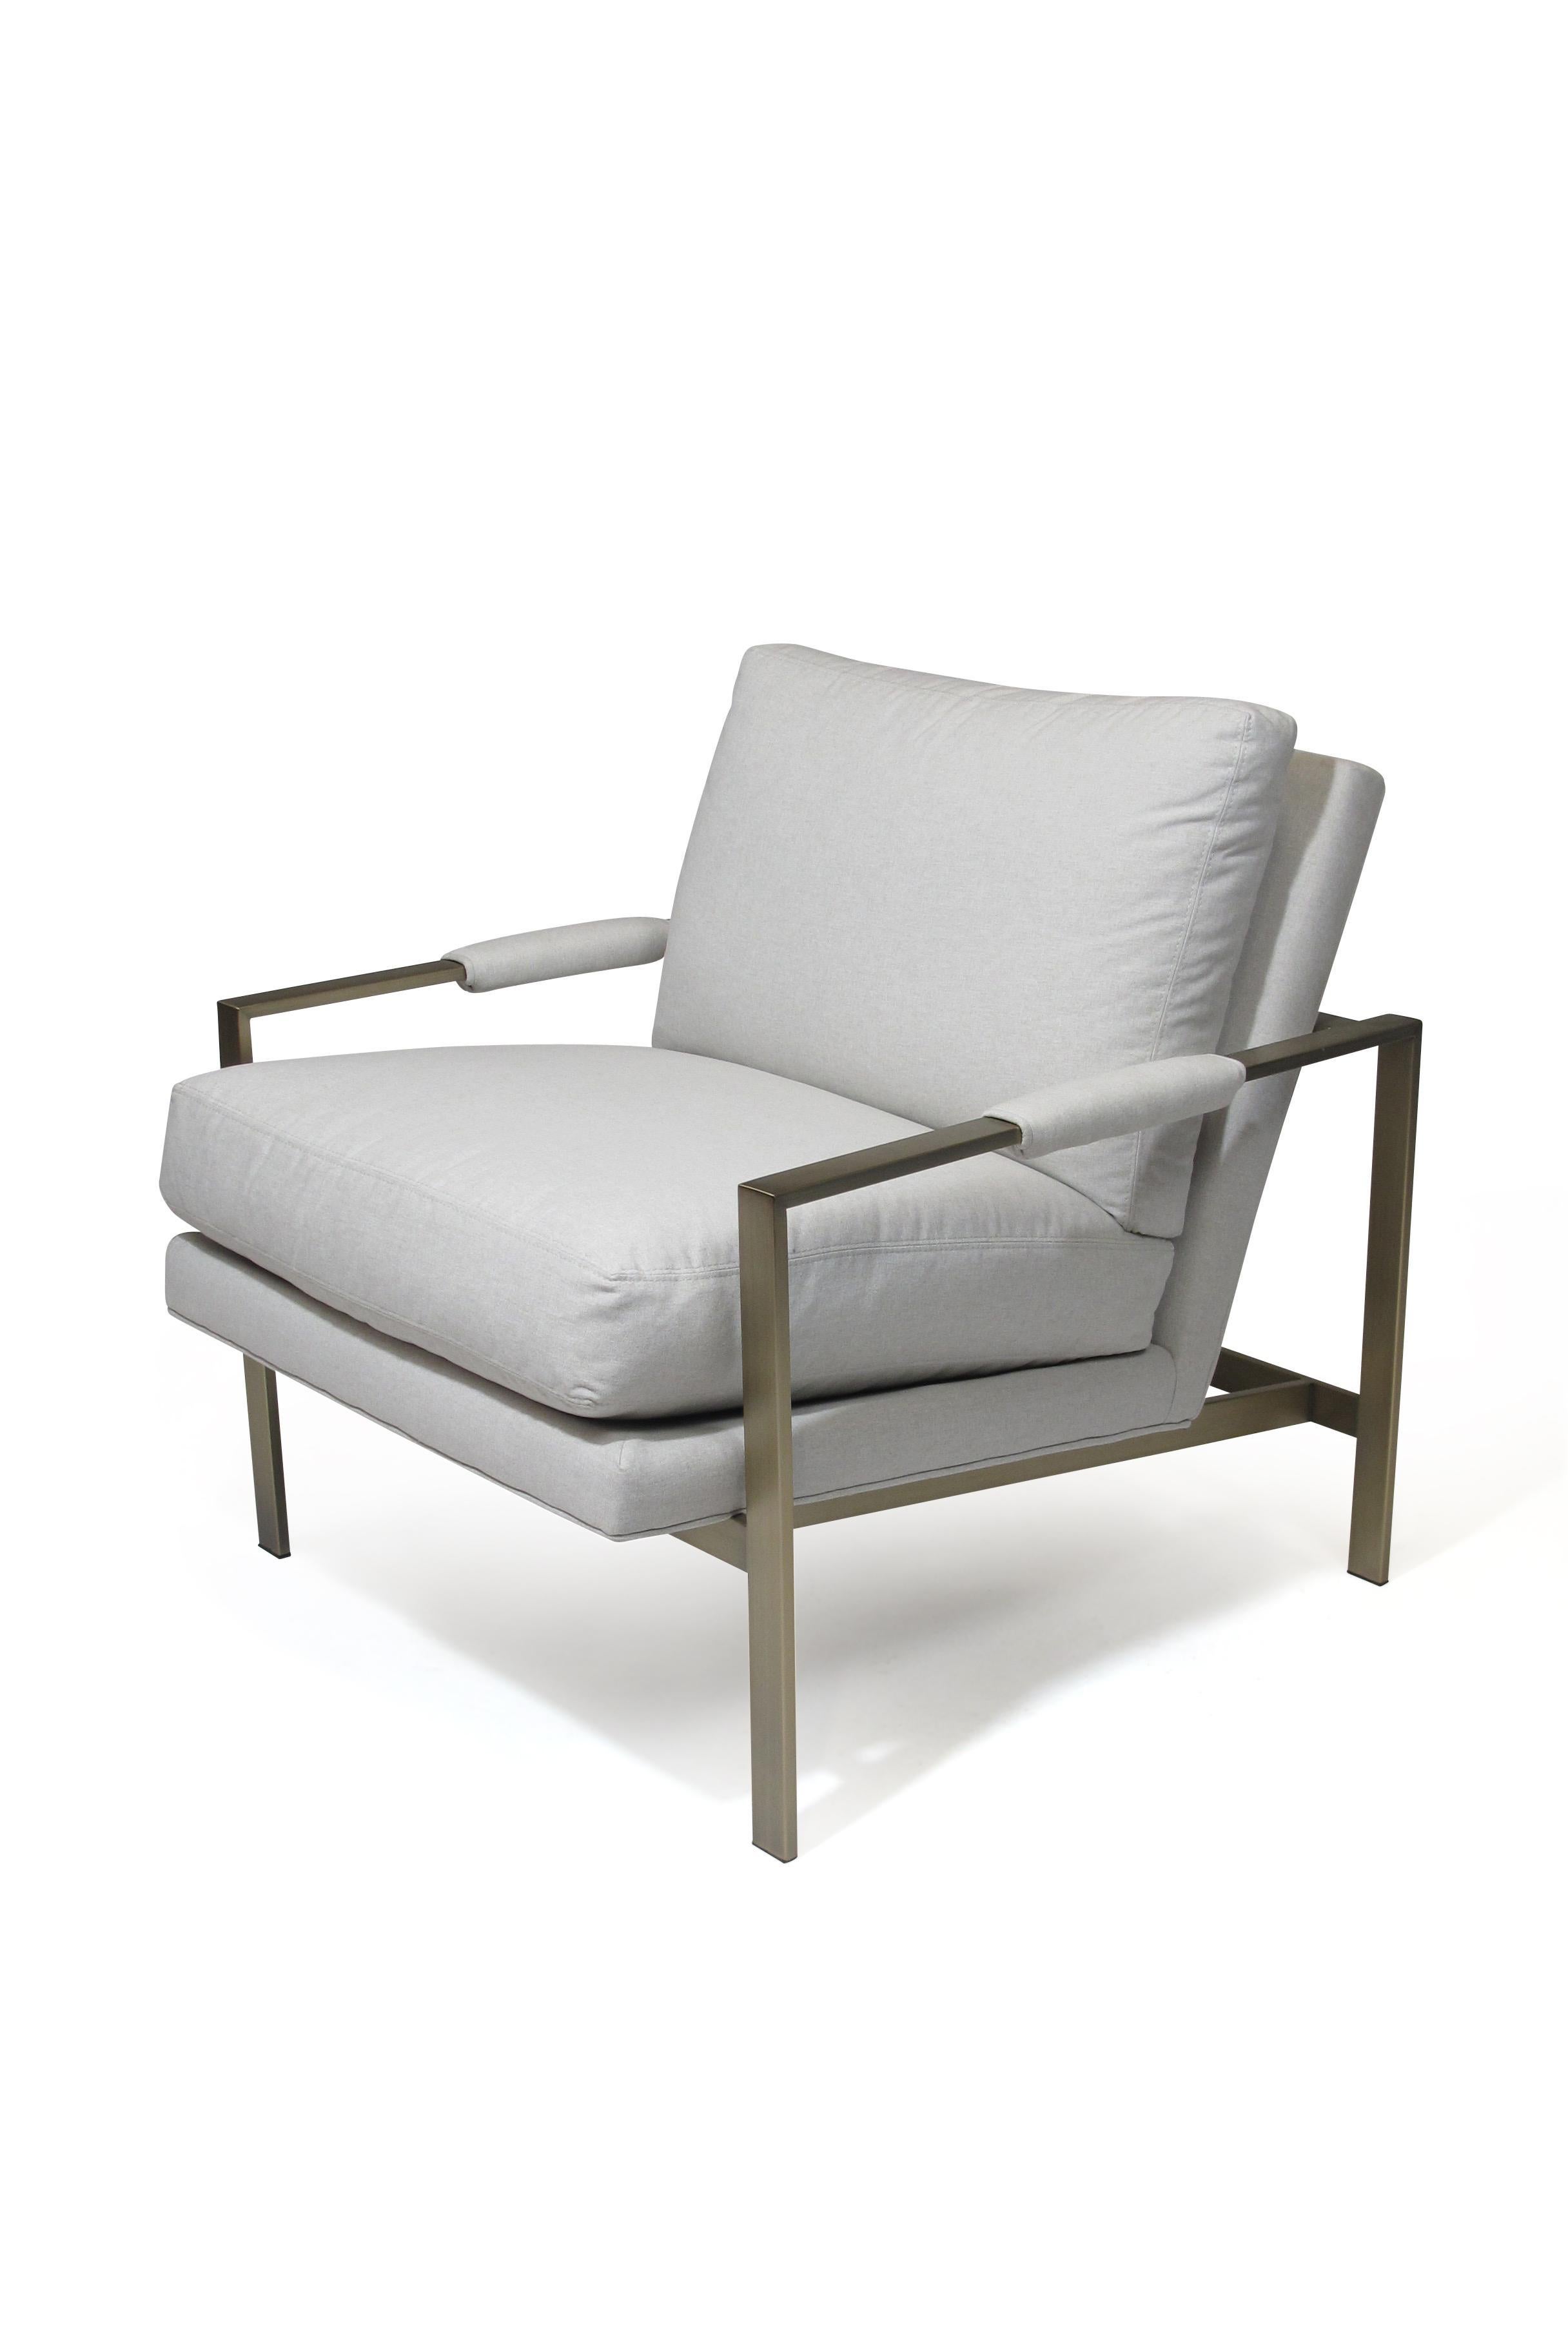 20th Century Midcentury Milo Baughman Brass Frame Lounge Chairs in Off-White Fabric For Sale